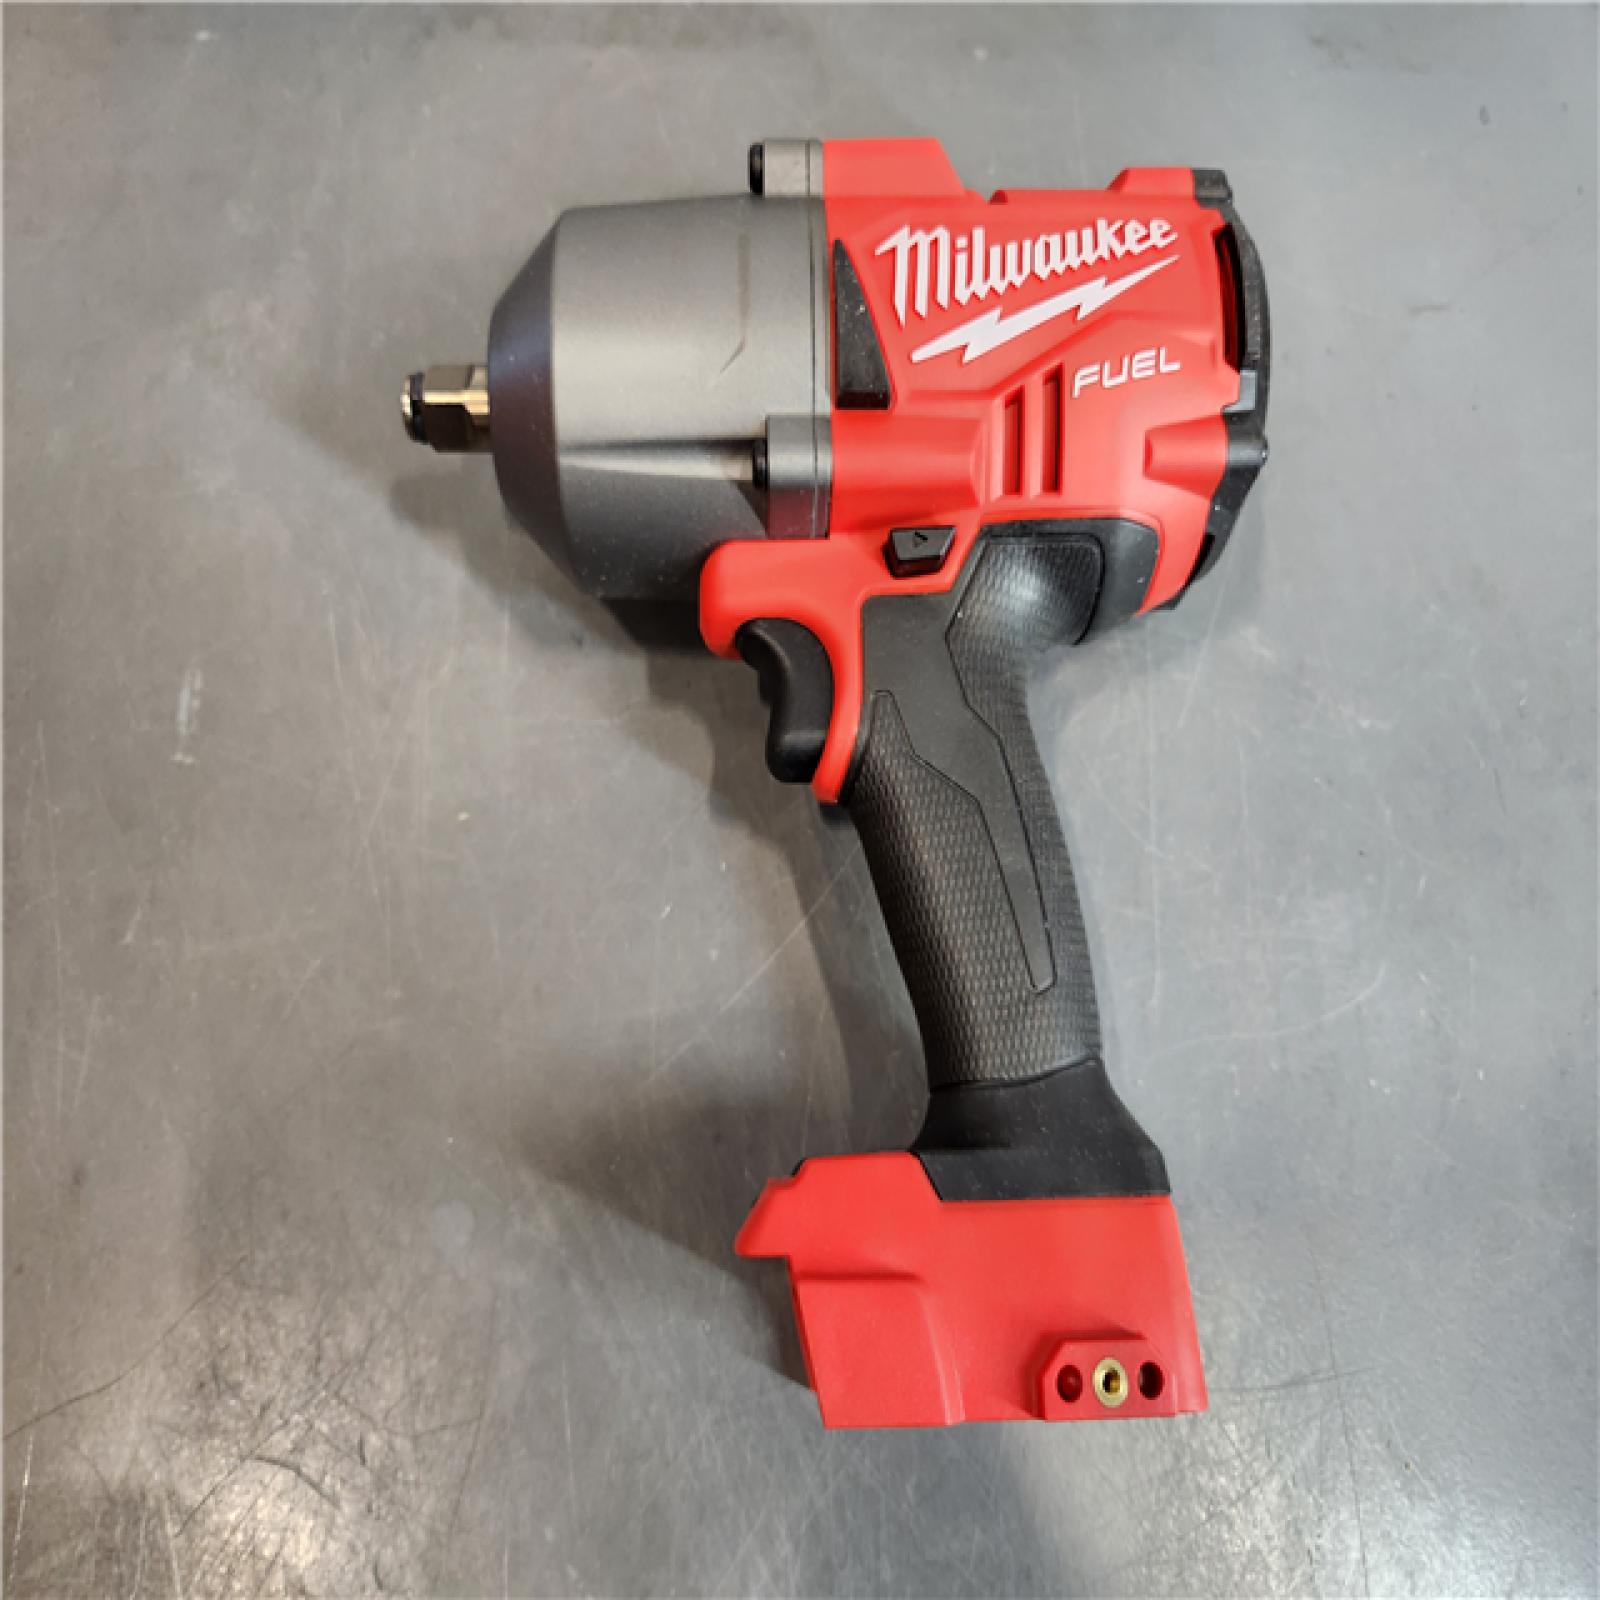 AS-IS Milwaukee High Torque Impact Wrench (TOOL ONLY)